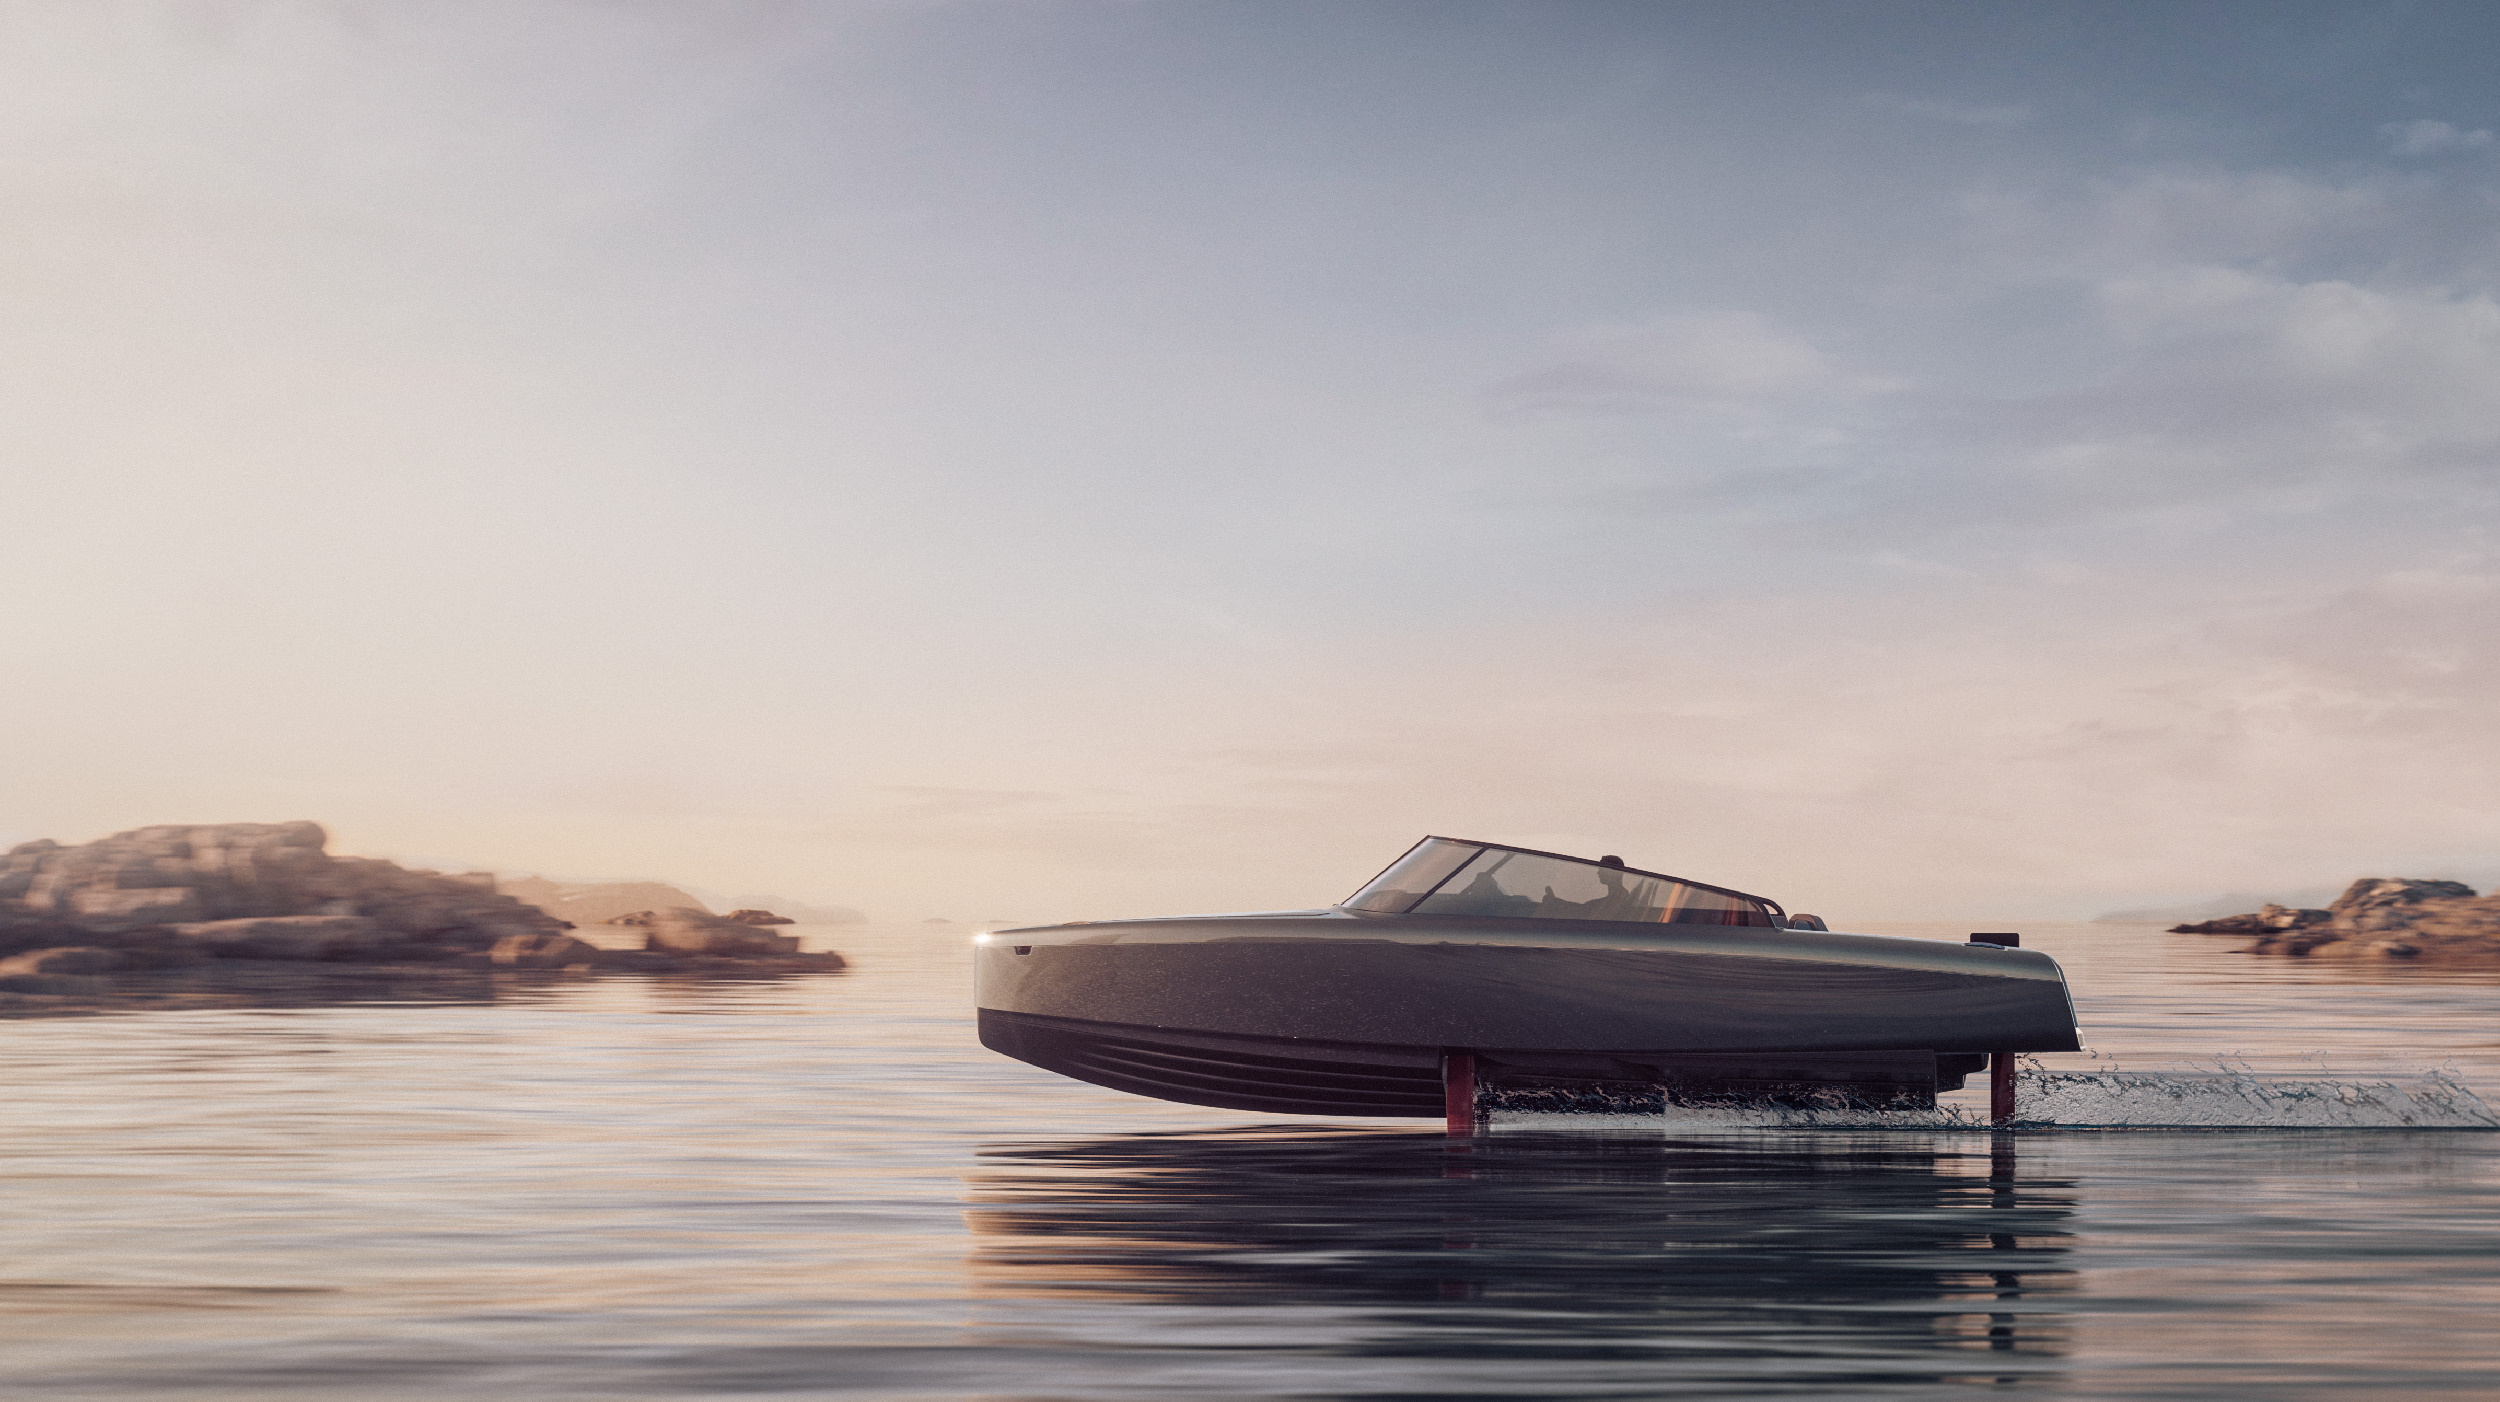 Candela’s hydrofoiling electric boats attract $24M investment in a bid for cleaner seas